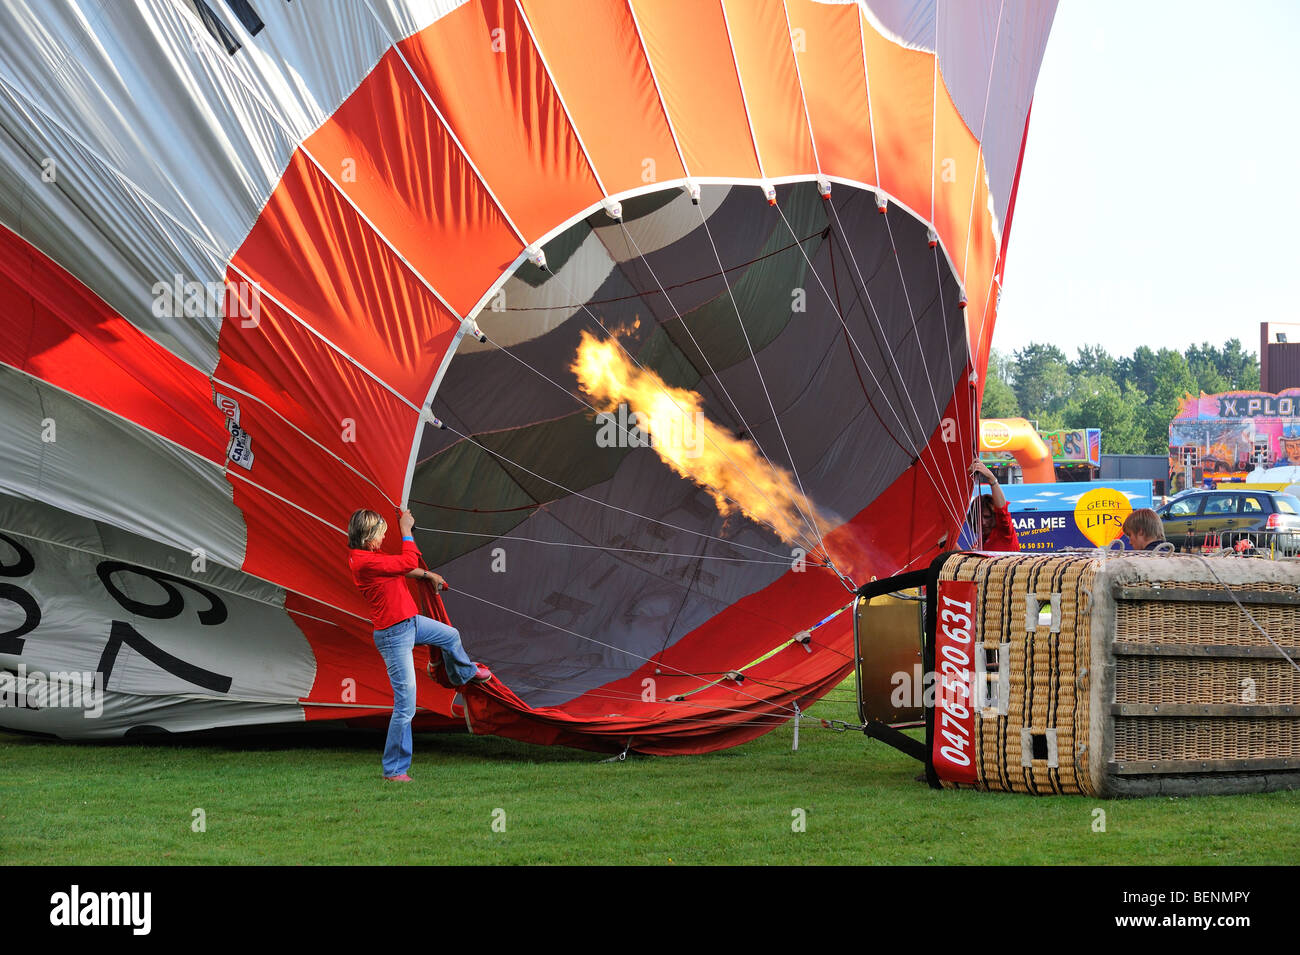 Balloonists / Aeronauts filling hot-air balloon with hot air from gas flame during ballooning meeting Stock Photo